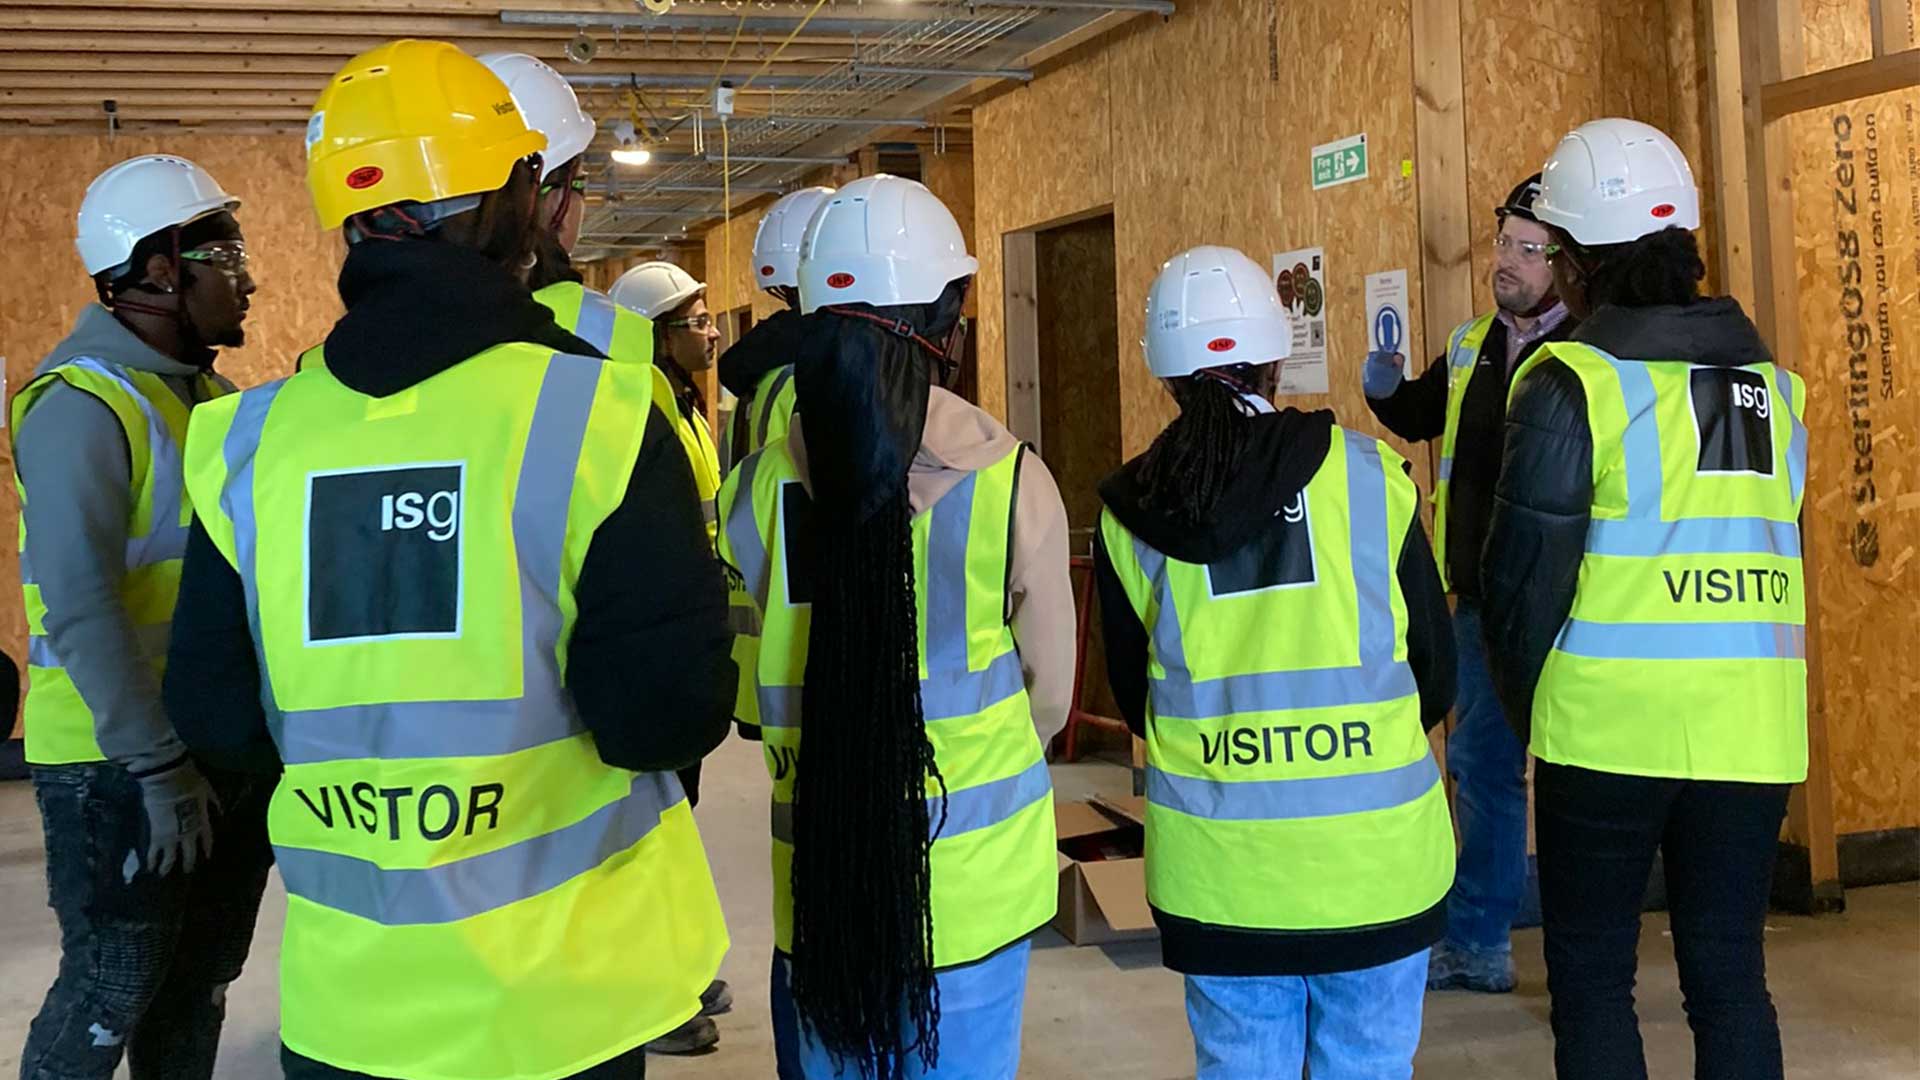 Students taking a tour of a construction site